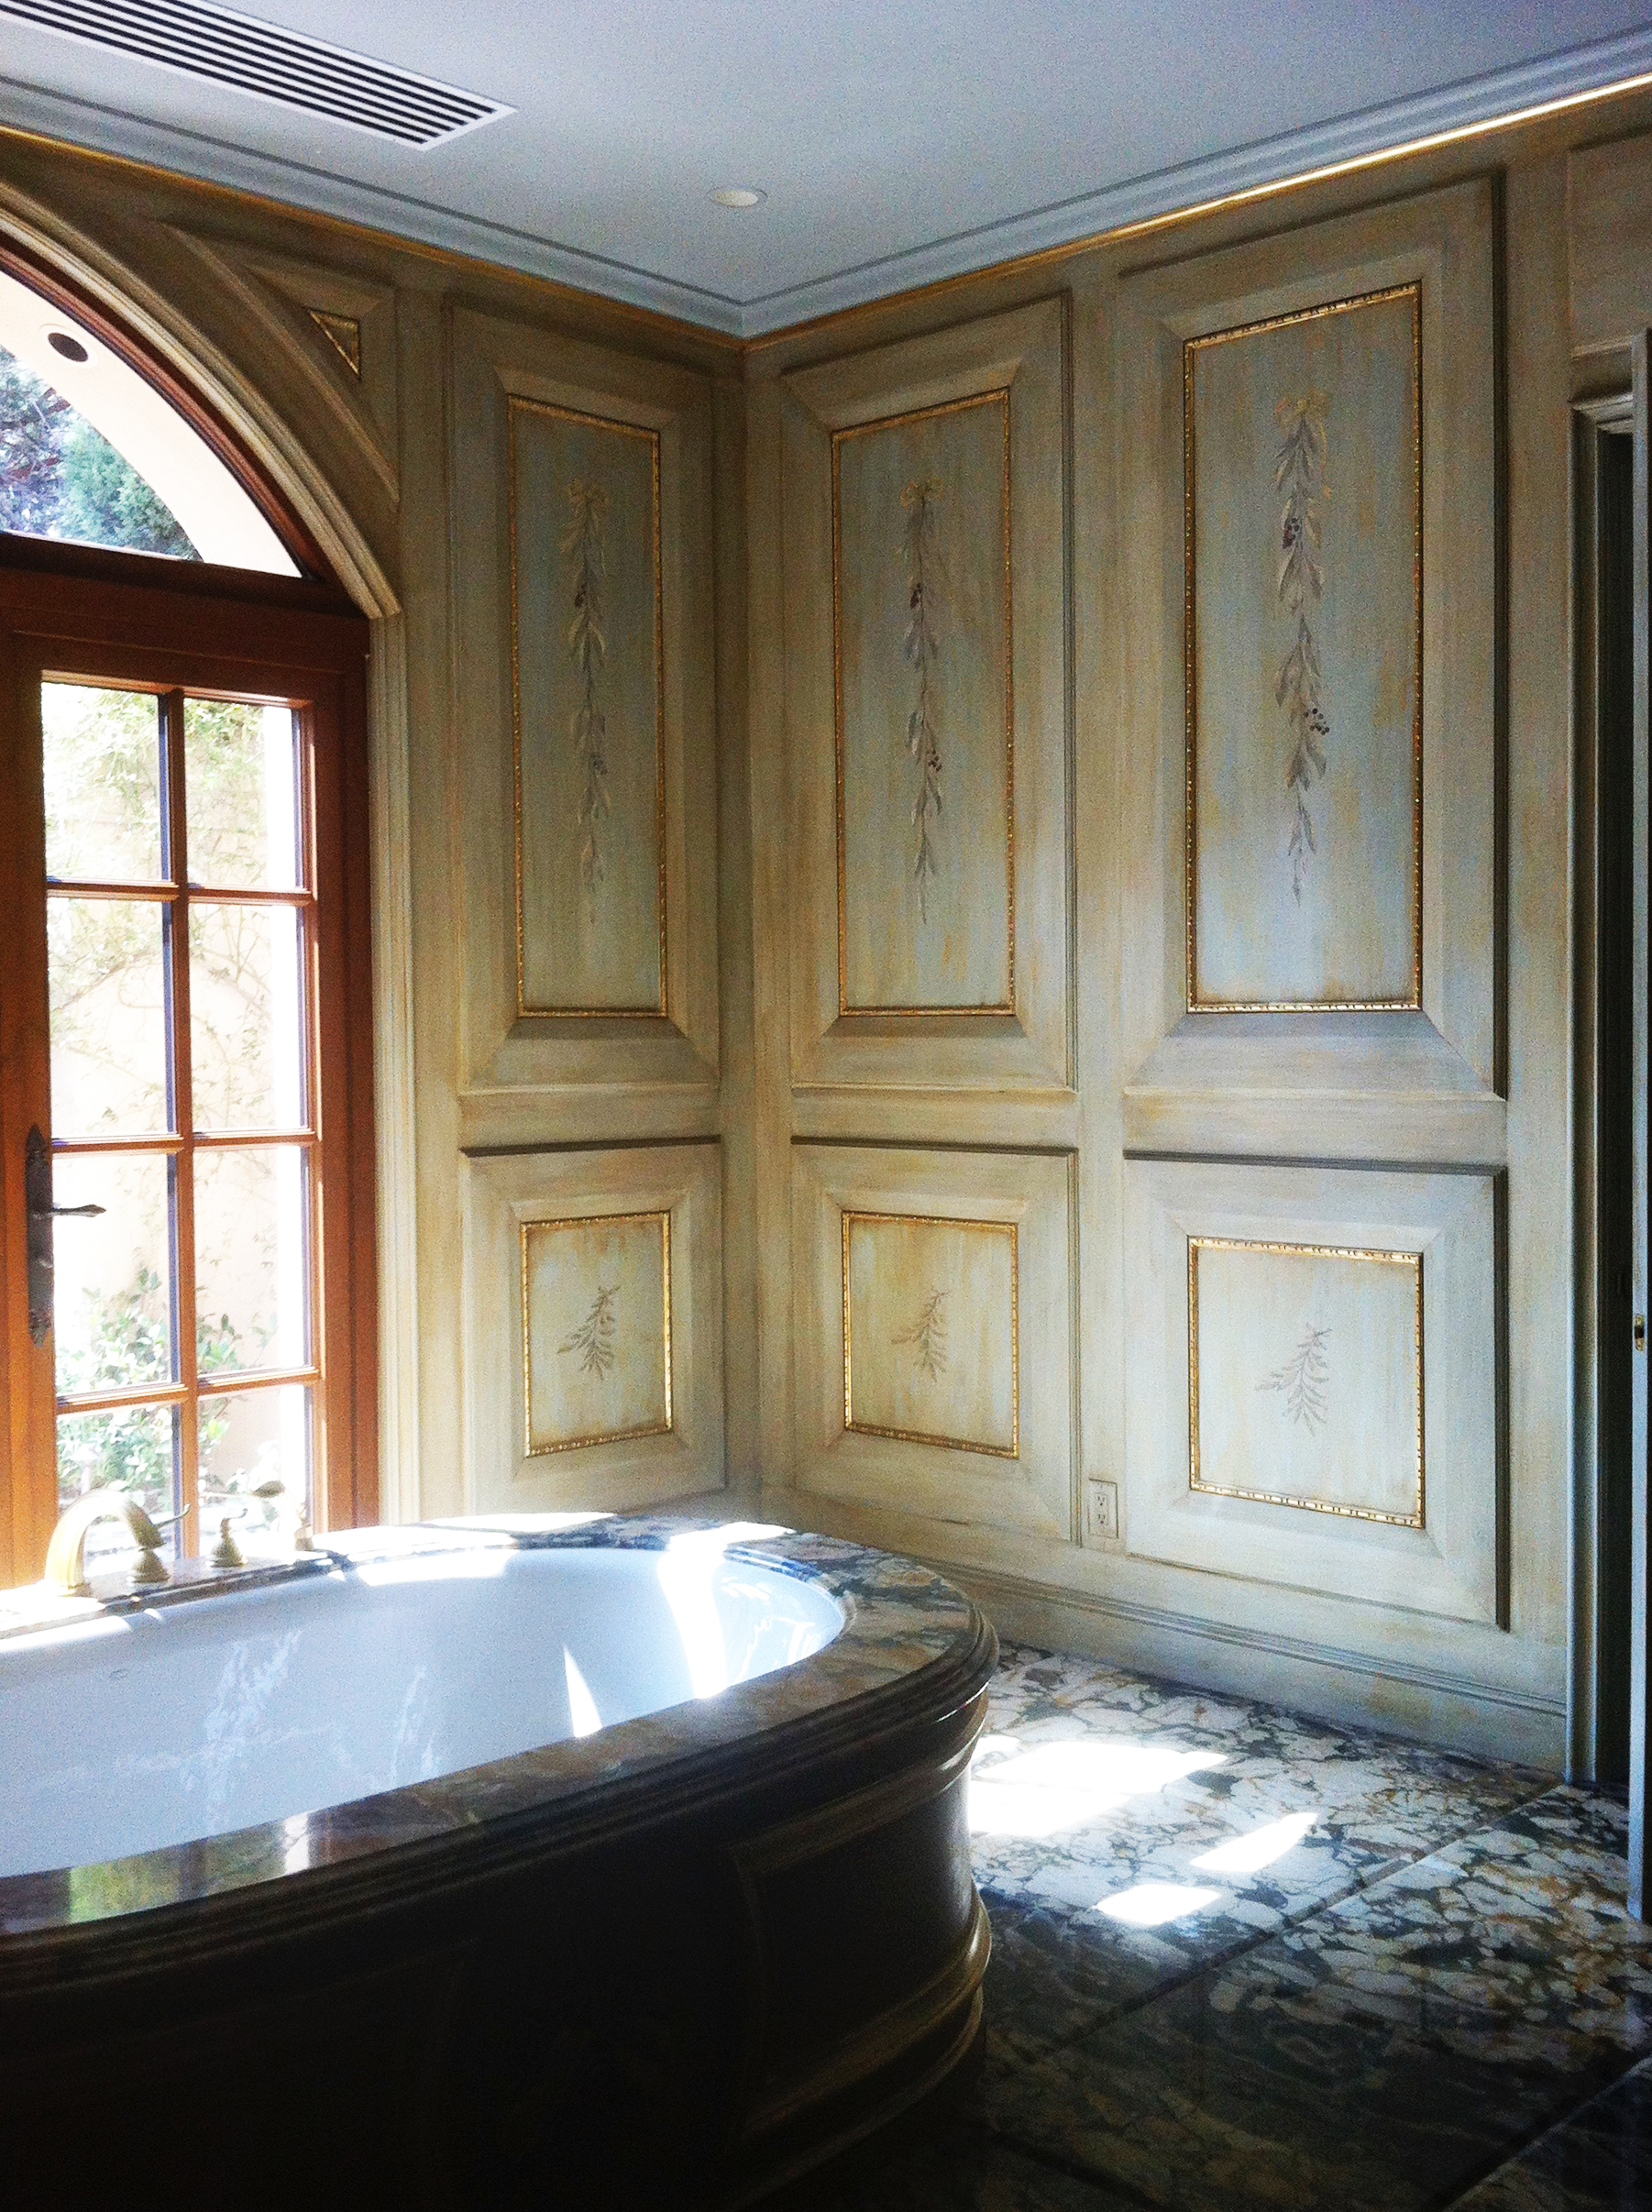  Chateau inspired faux finishing in a coffered master bathroom. 